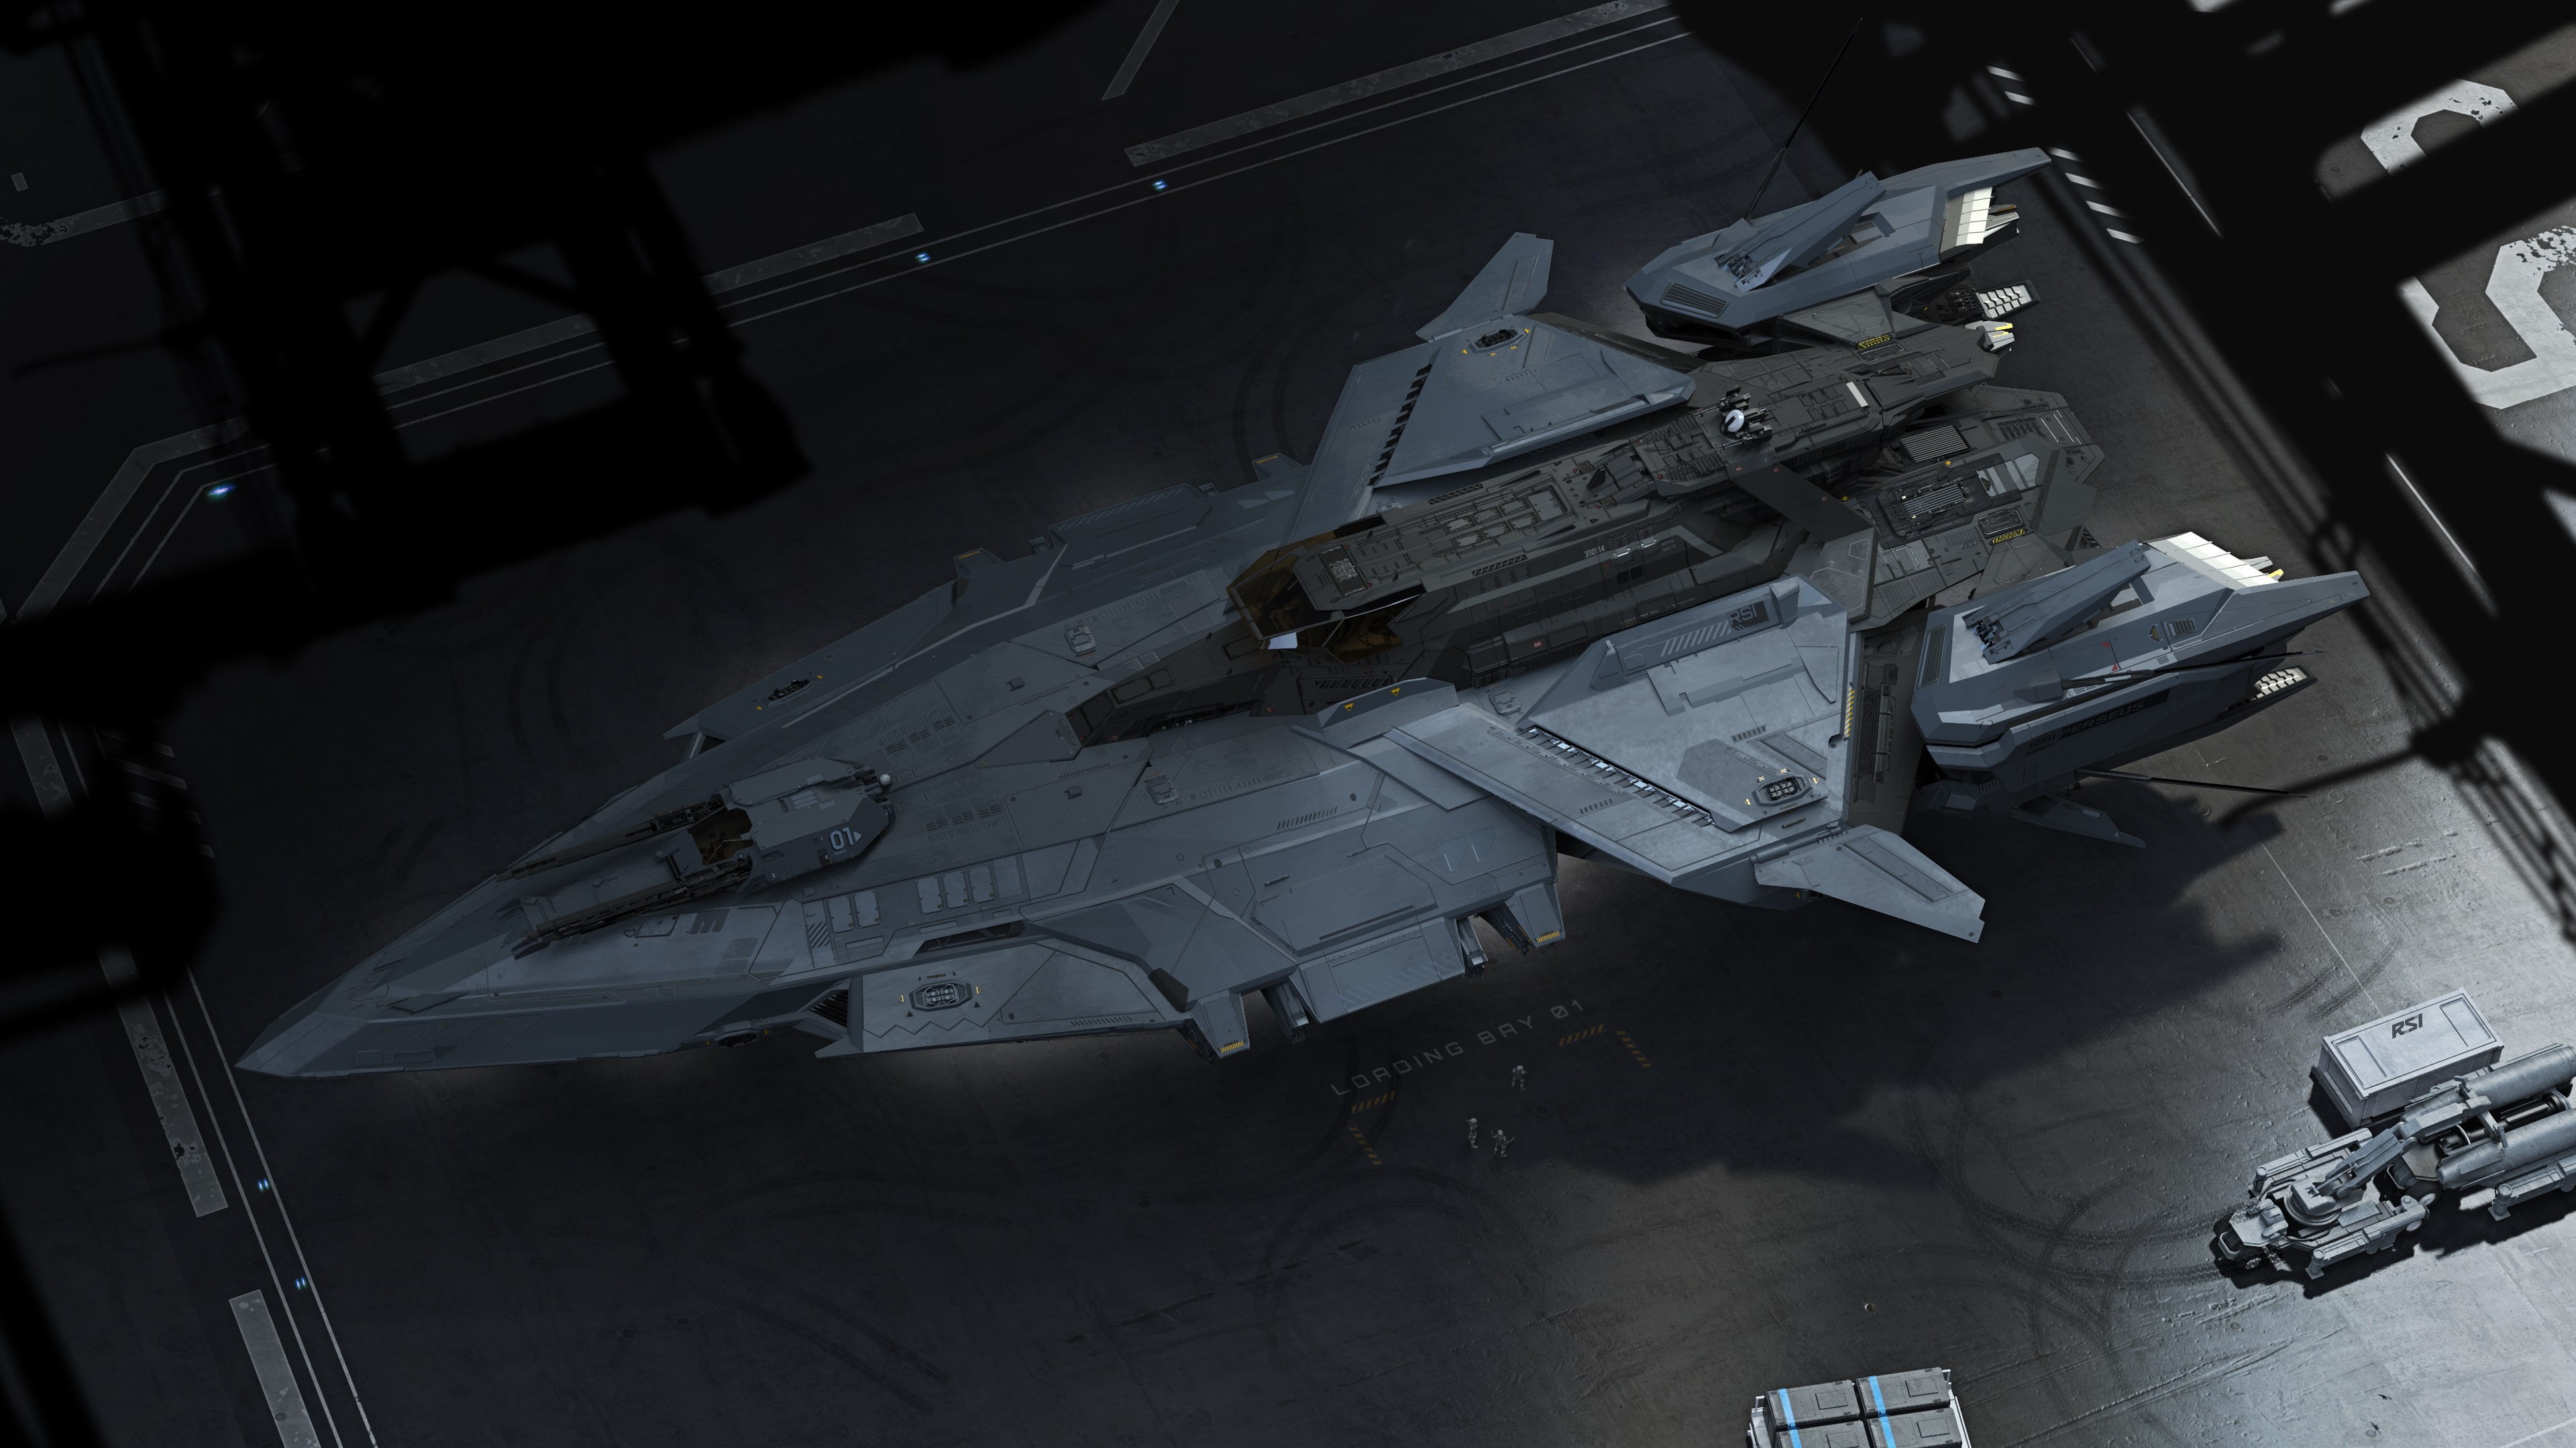 Discover the RSI Arrastra - Roberts Space Industries  Follow the  development of Star Citizen and Squadron 42